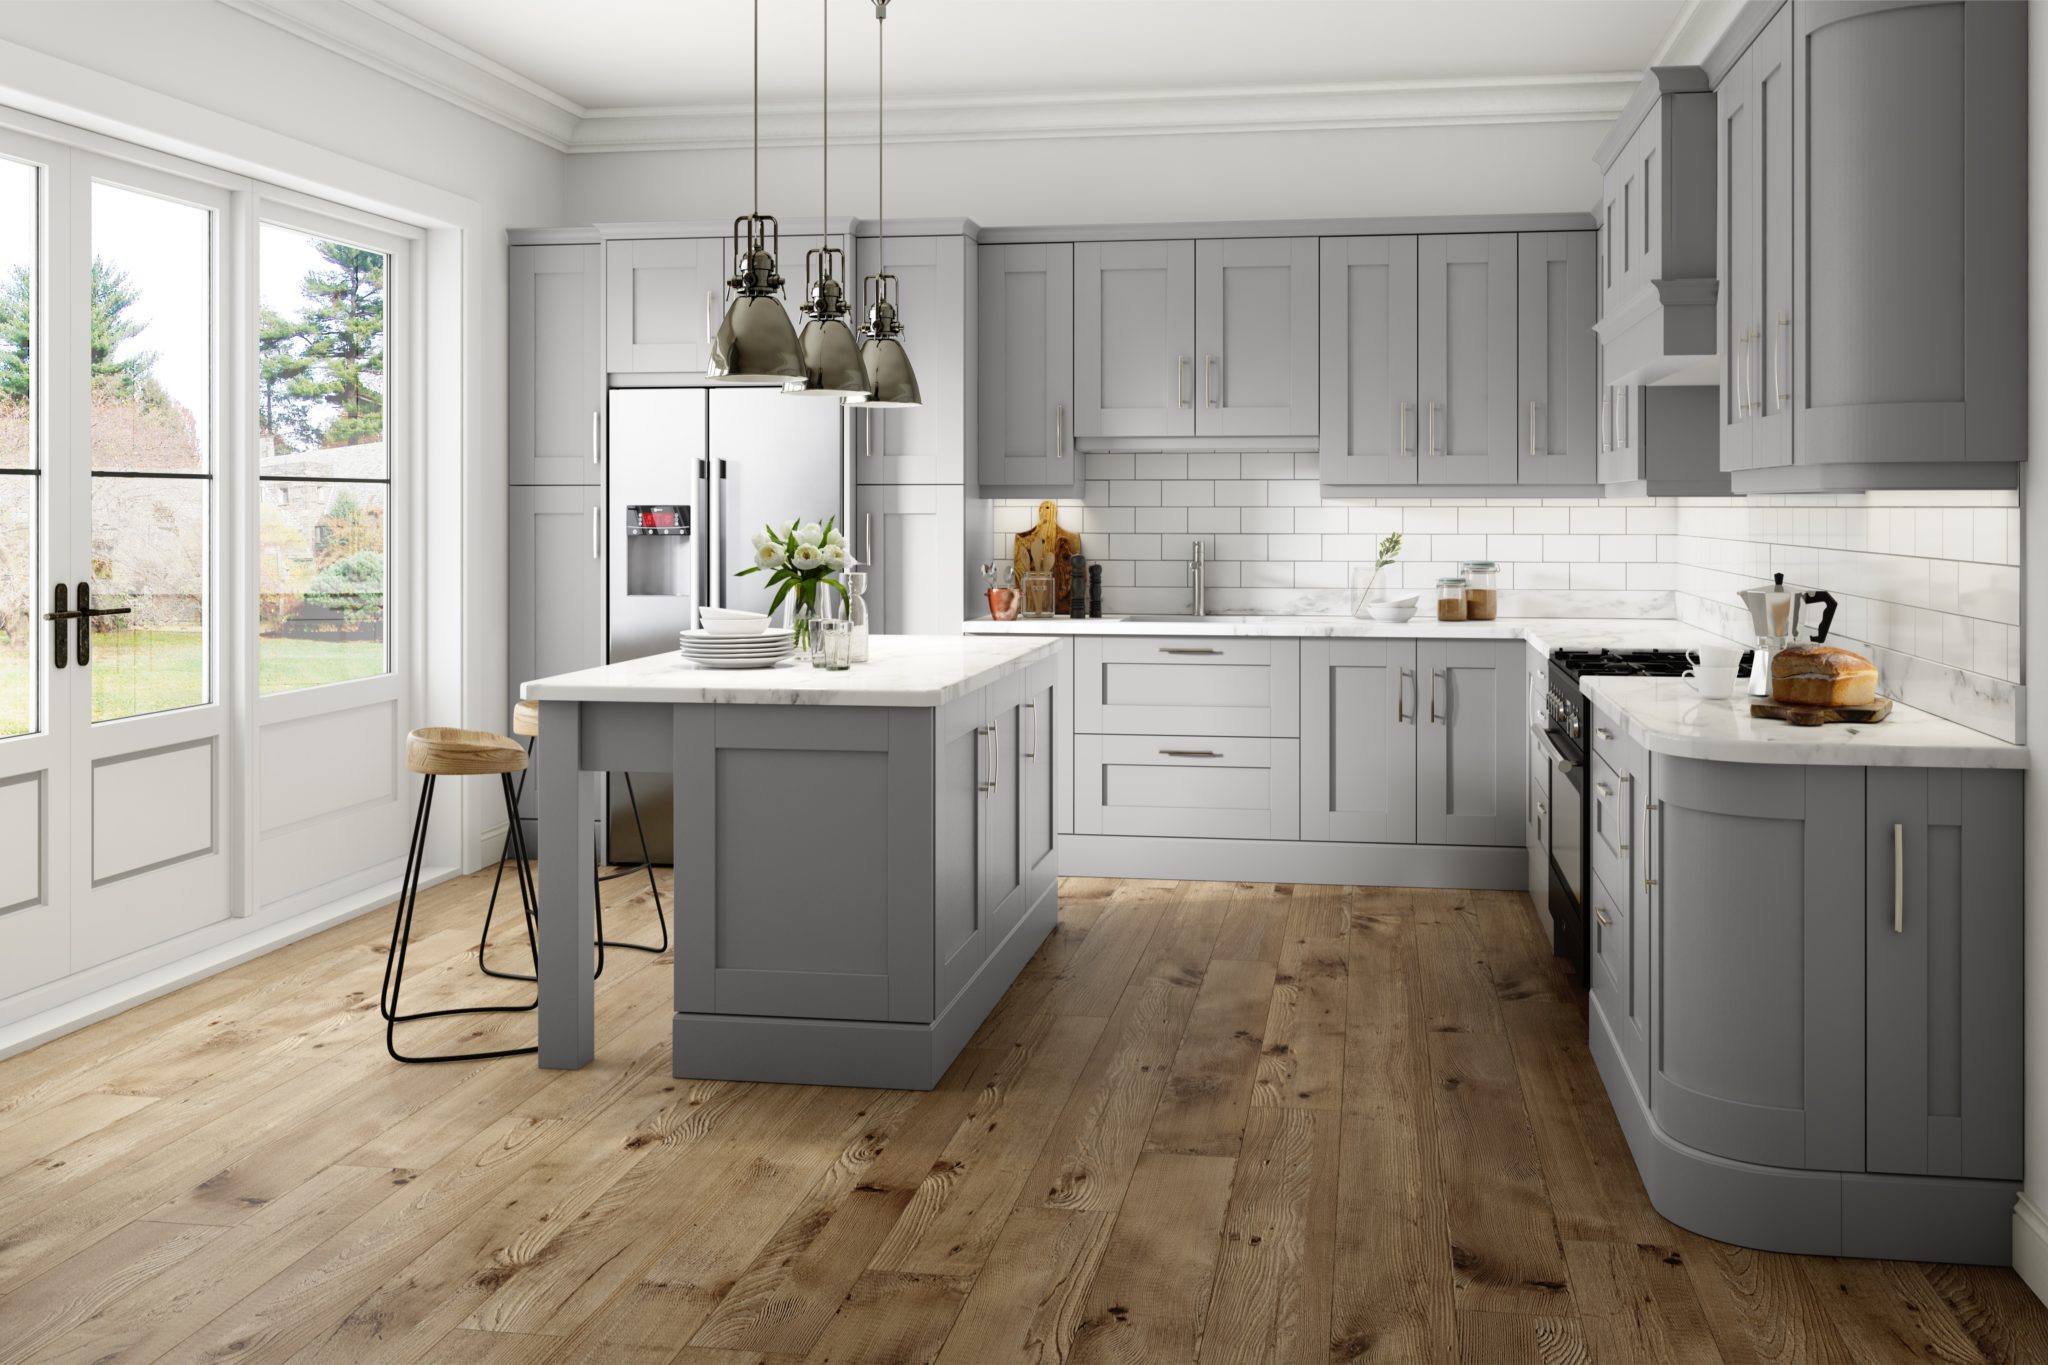 Made to Measure Kitchens - Kitchen Door Replacement - Bespoke Kitchens